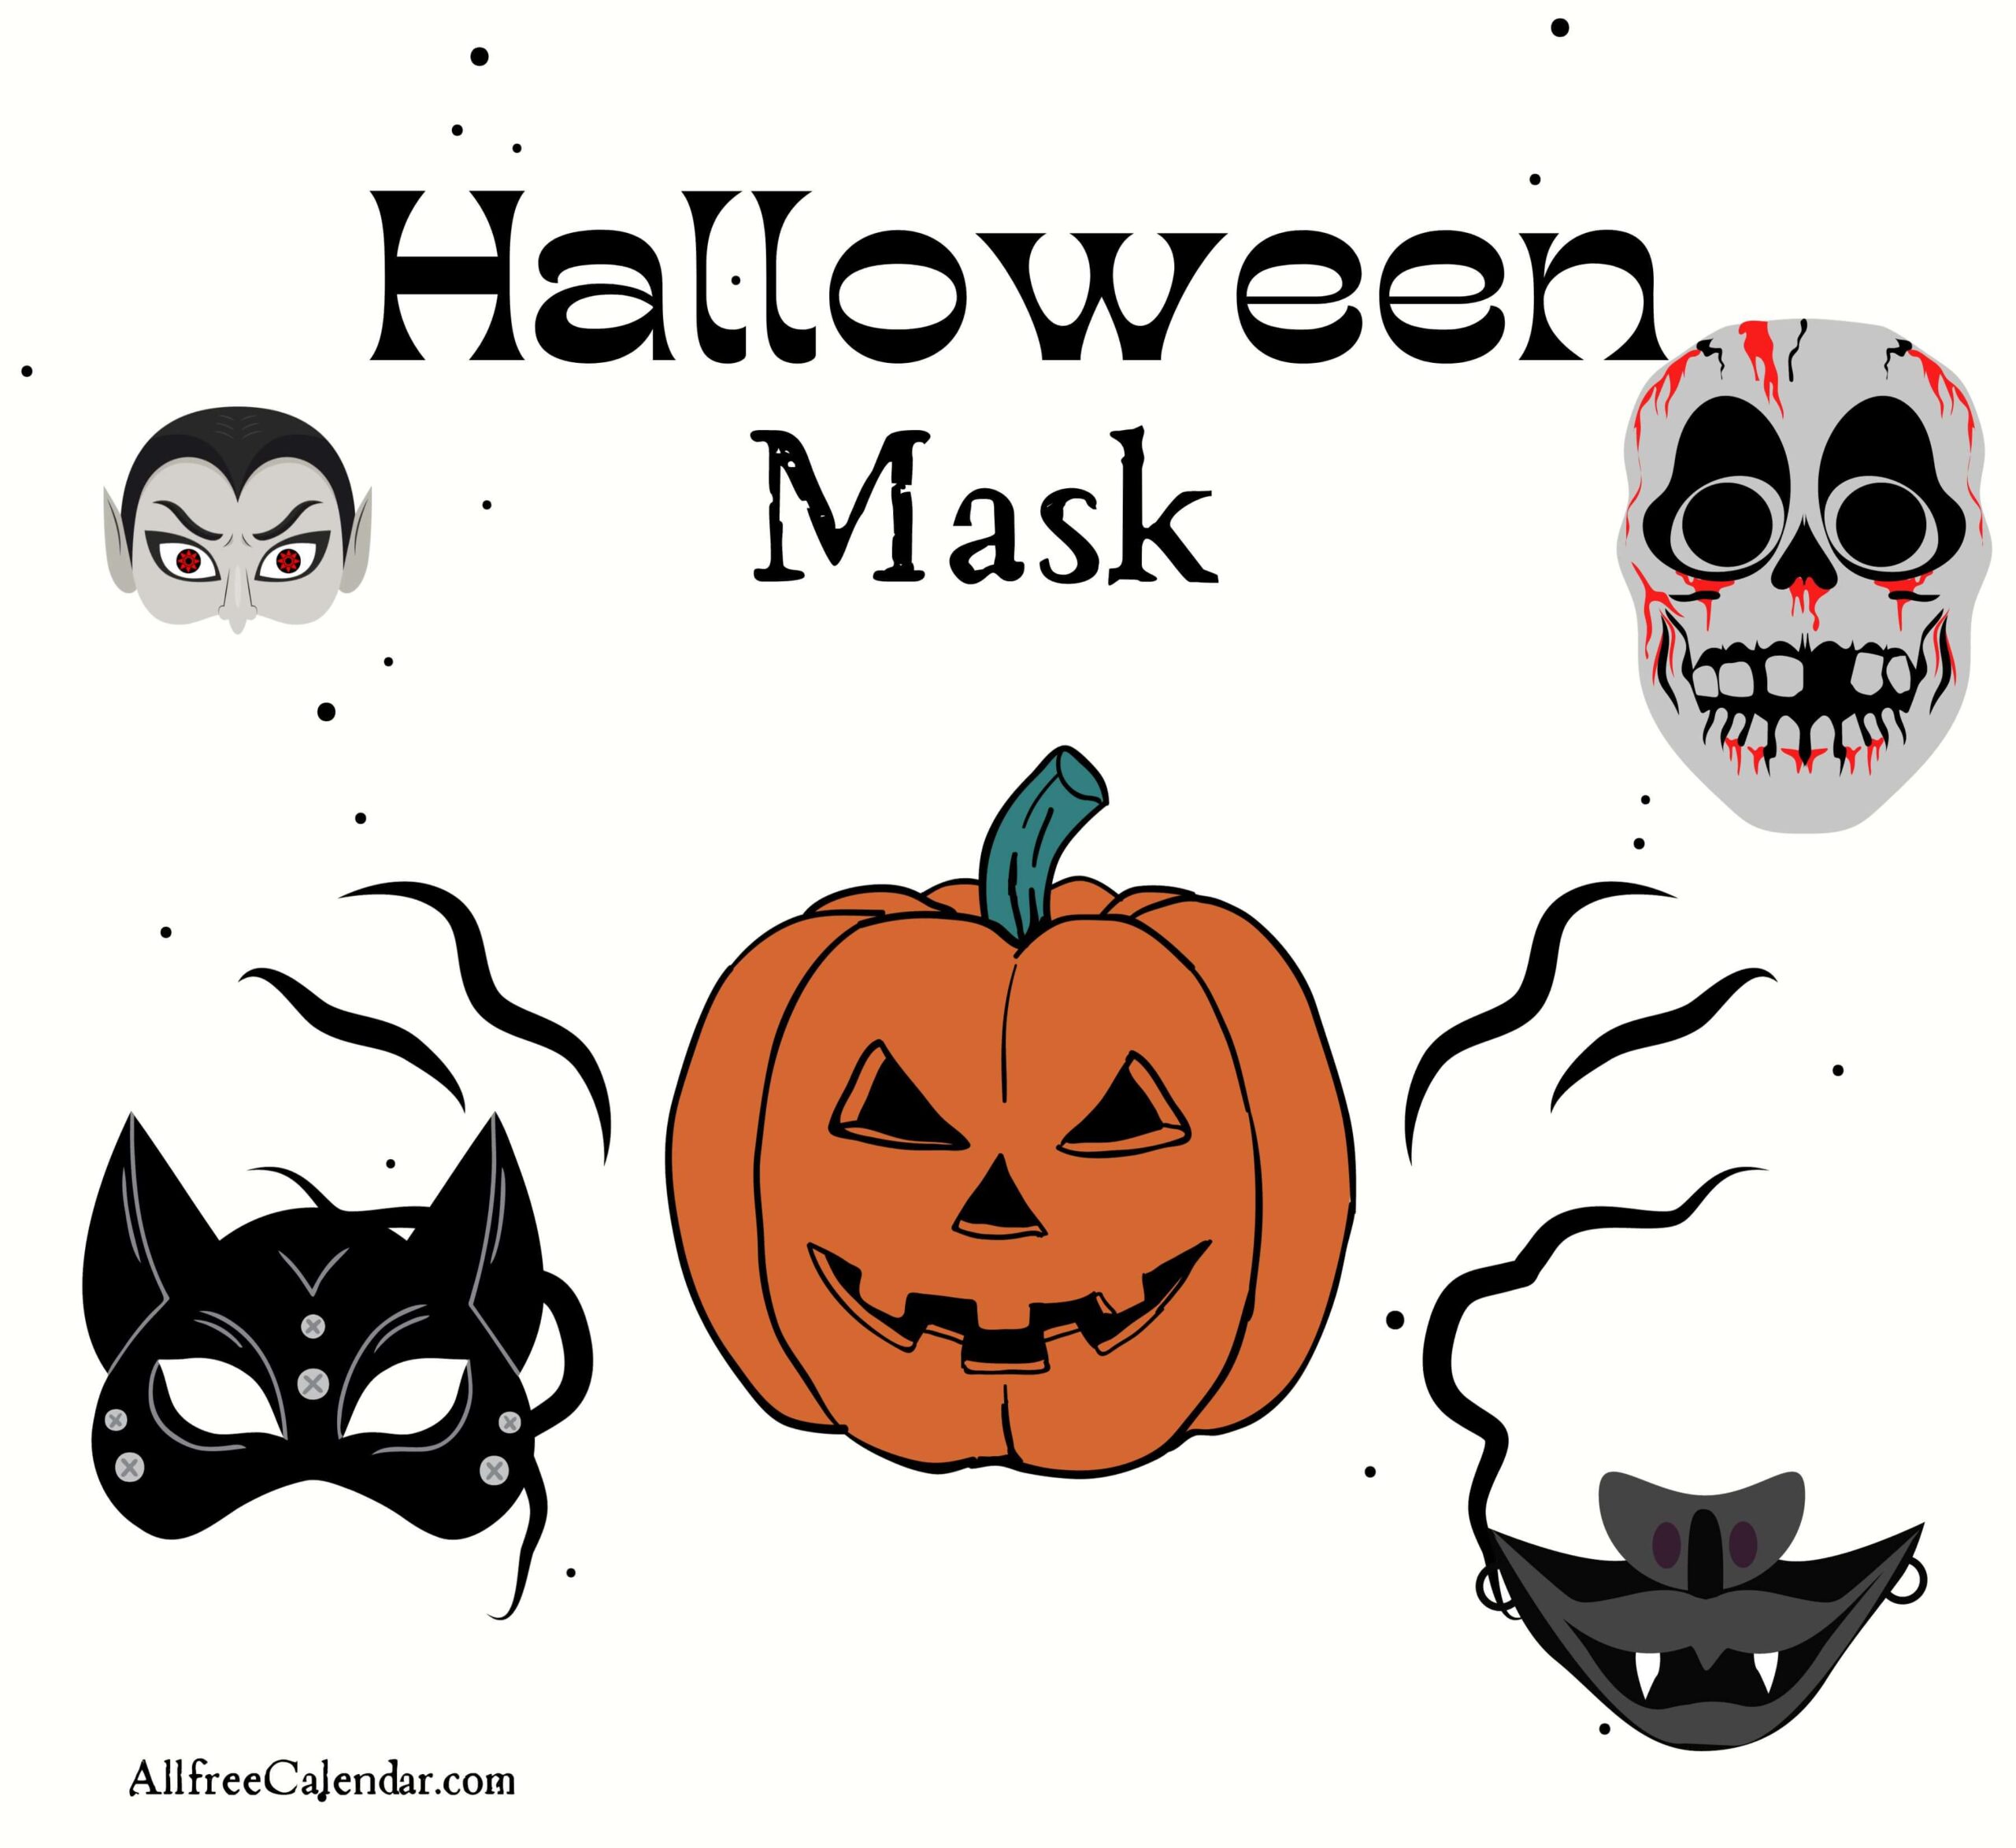 Halloween Mask For Free